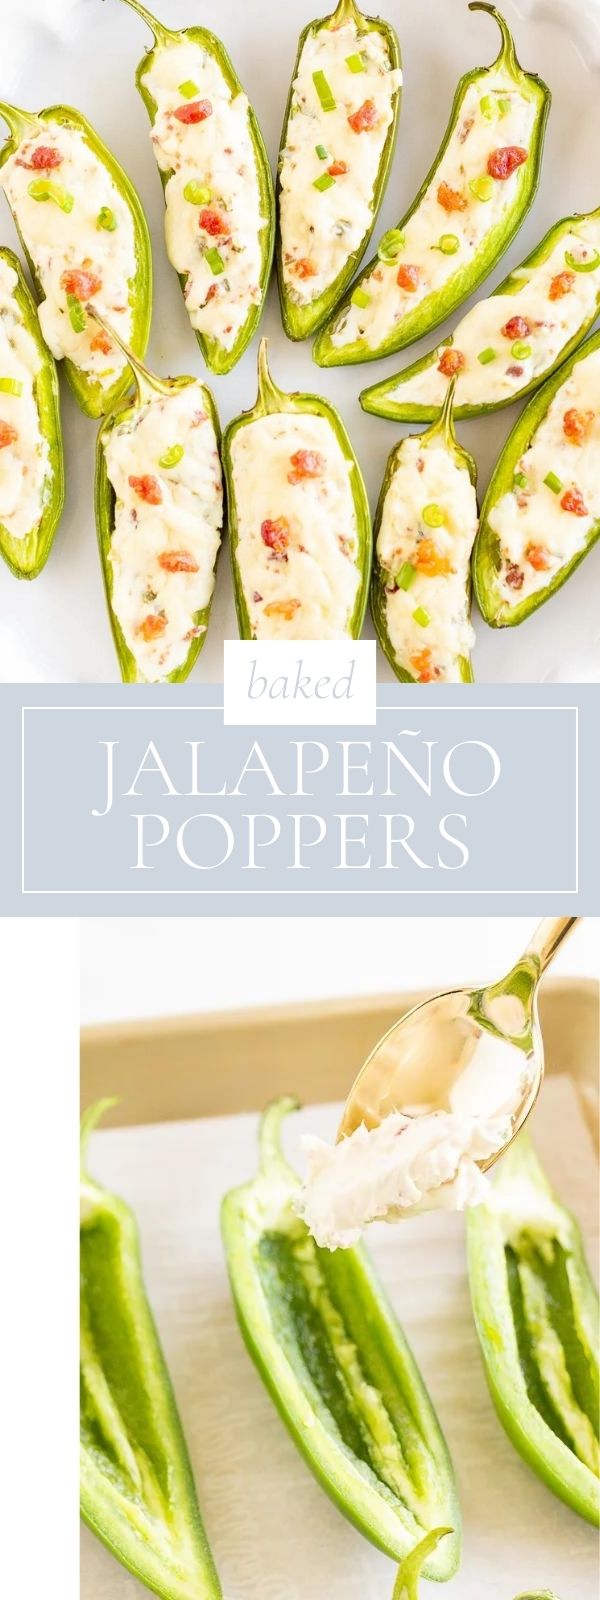 Jalapeno poppers on a plate.